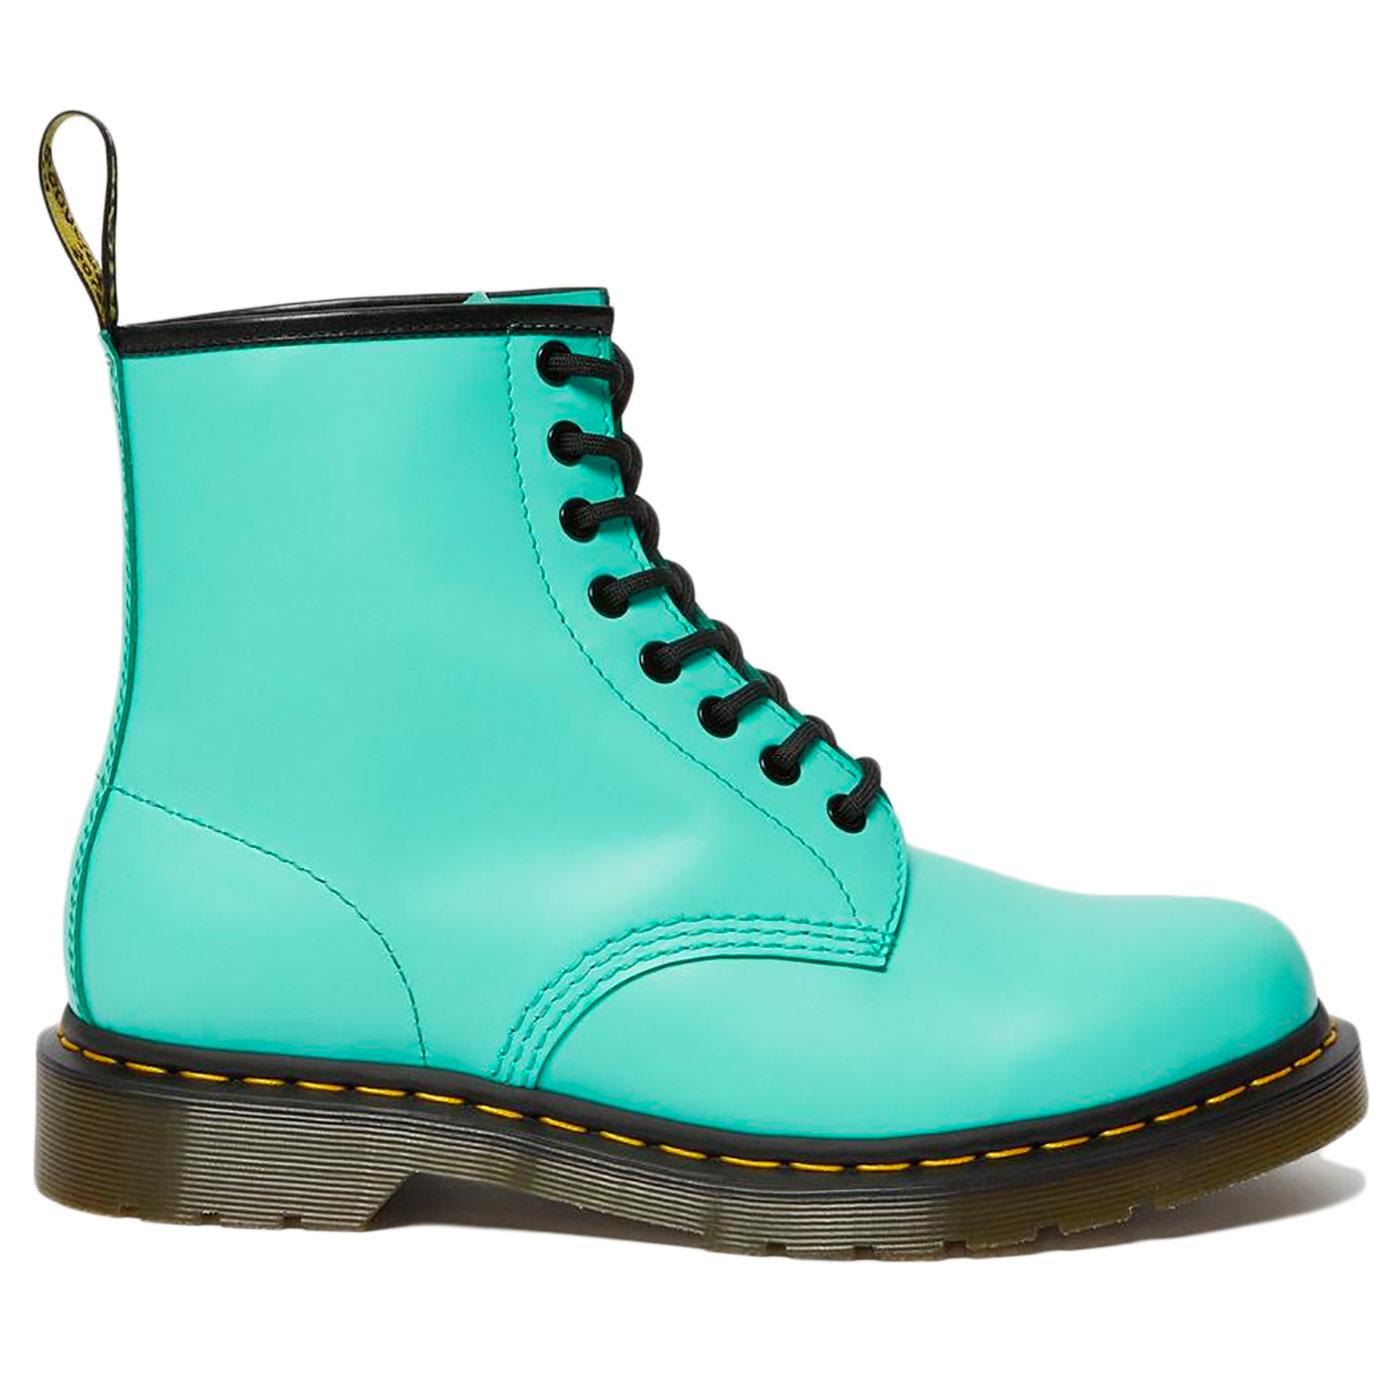 DR MARTENS 1460 Retro Smooth Ankle Boots in Peppermint